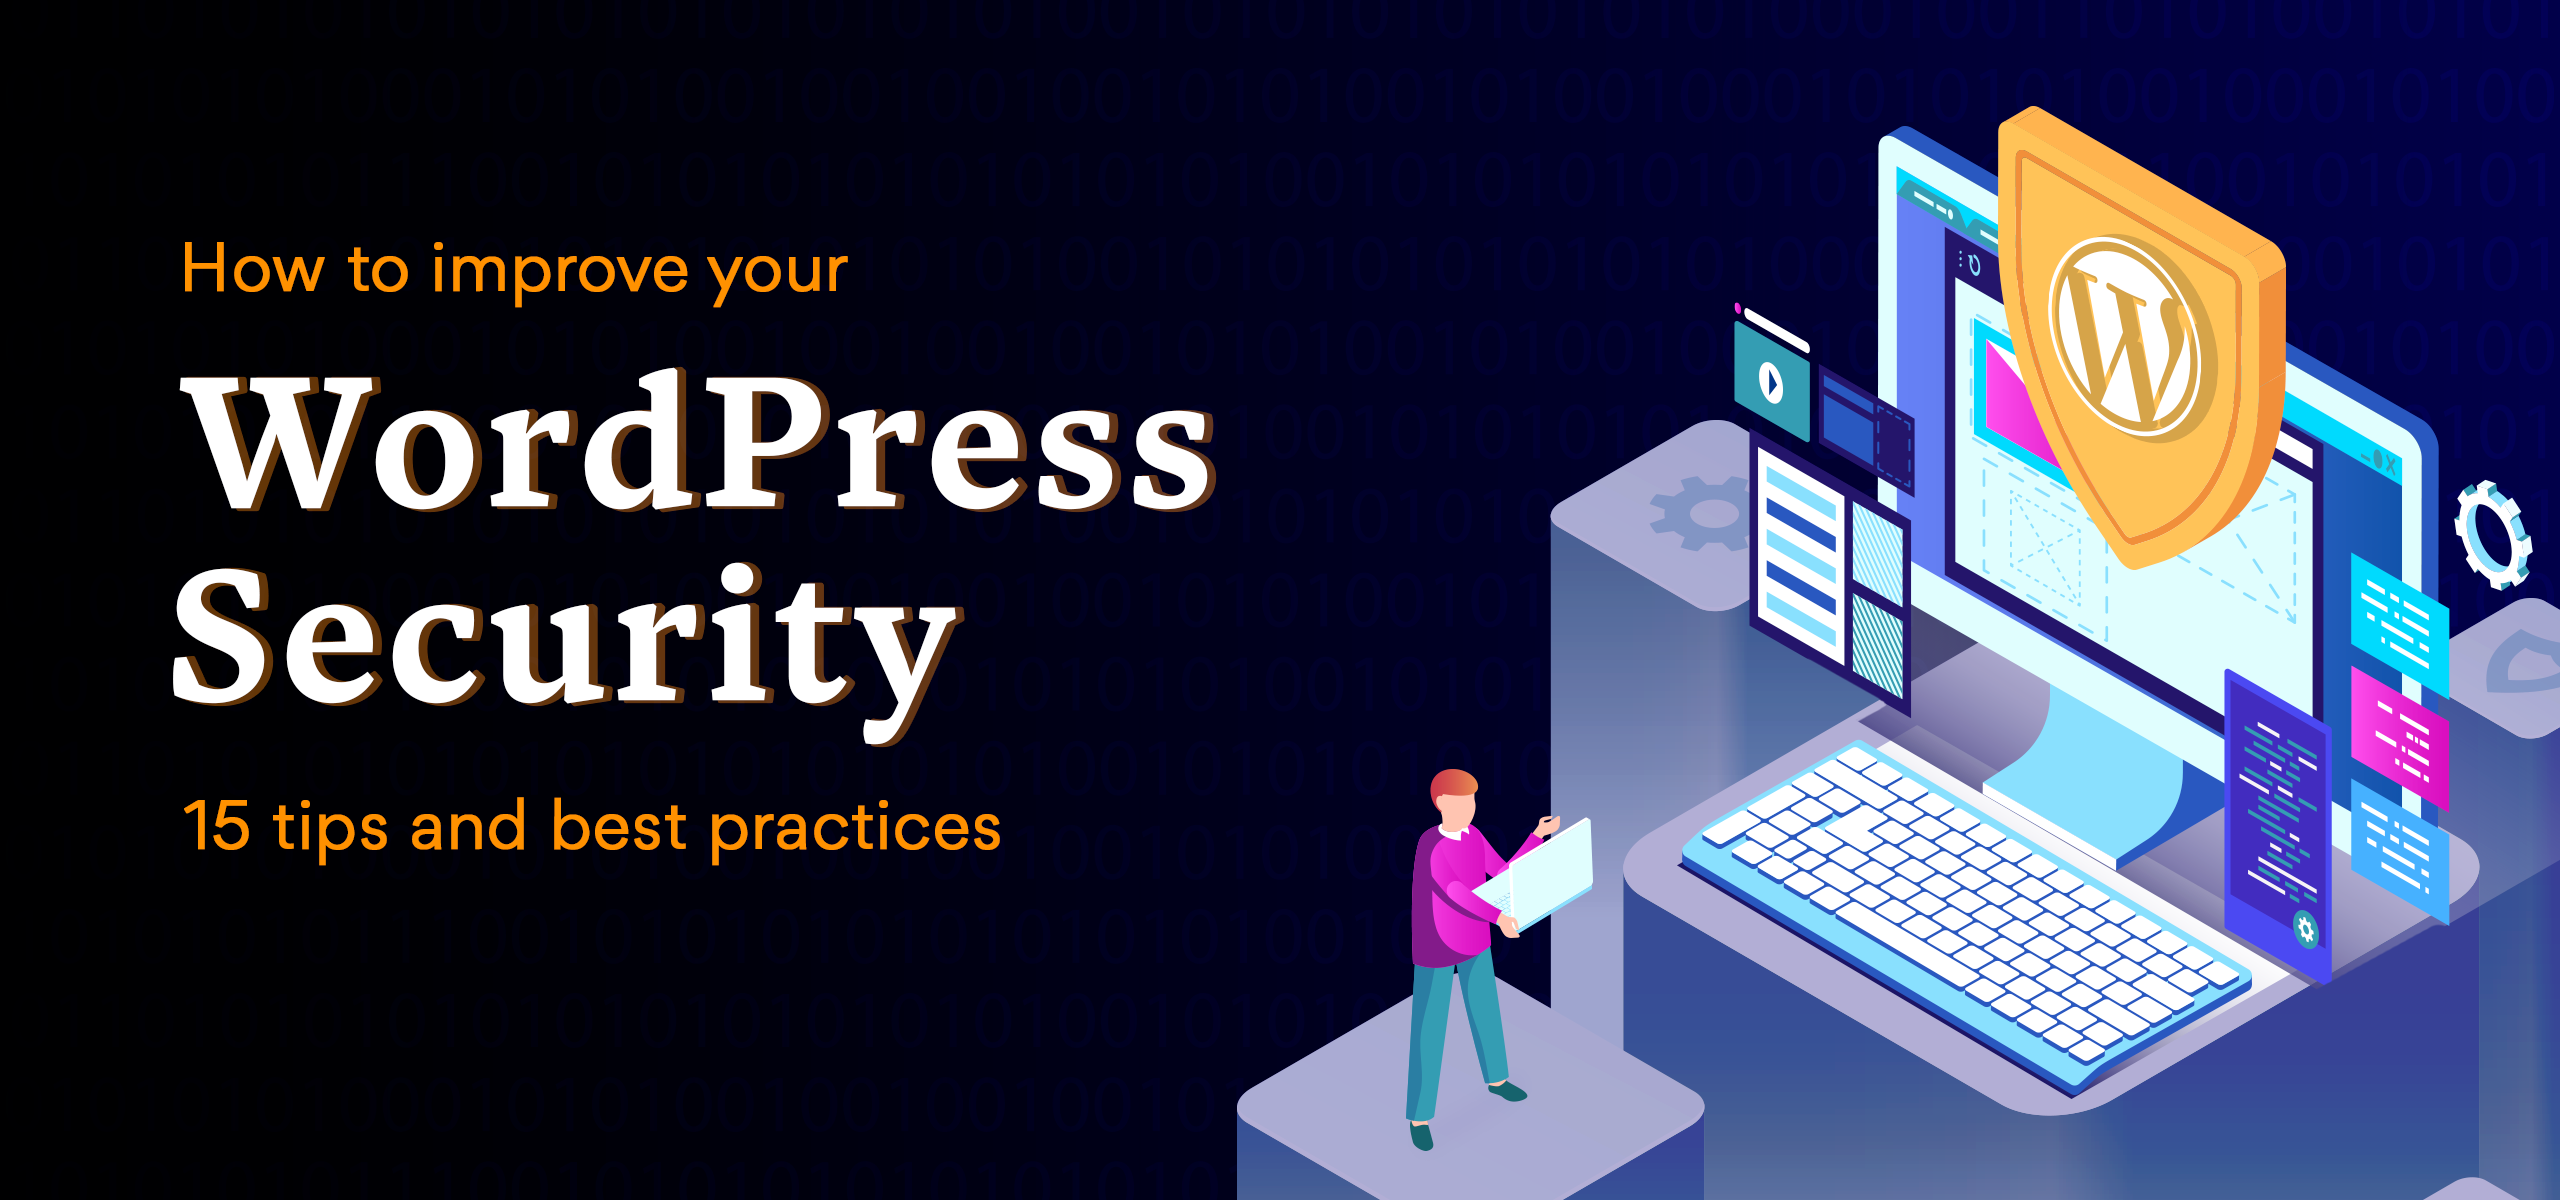 How to Secure a Website: 16 WordPress Security Tips and Best Practices